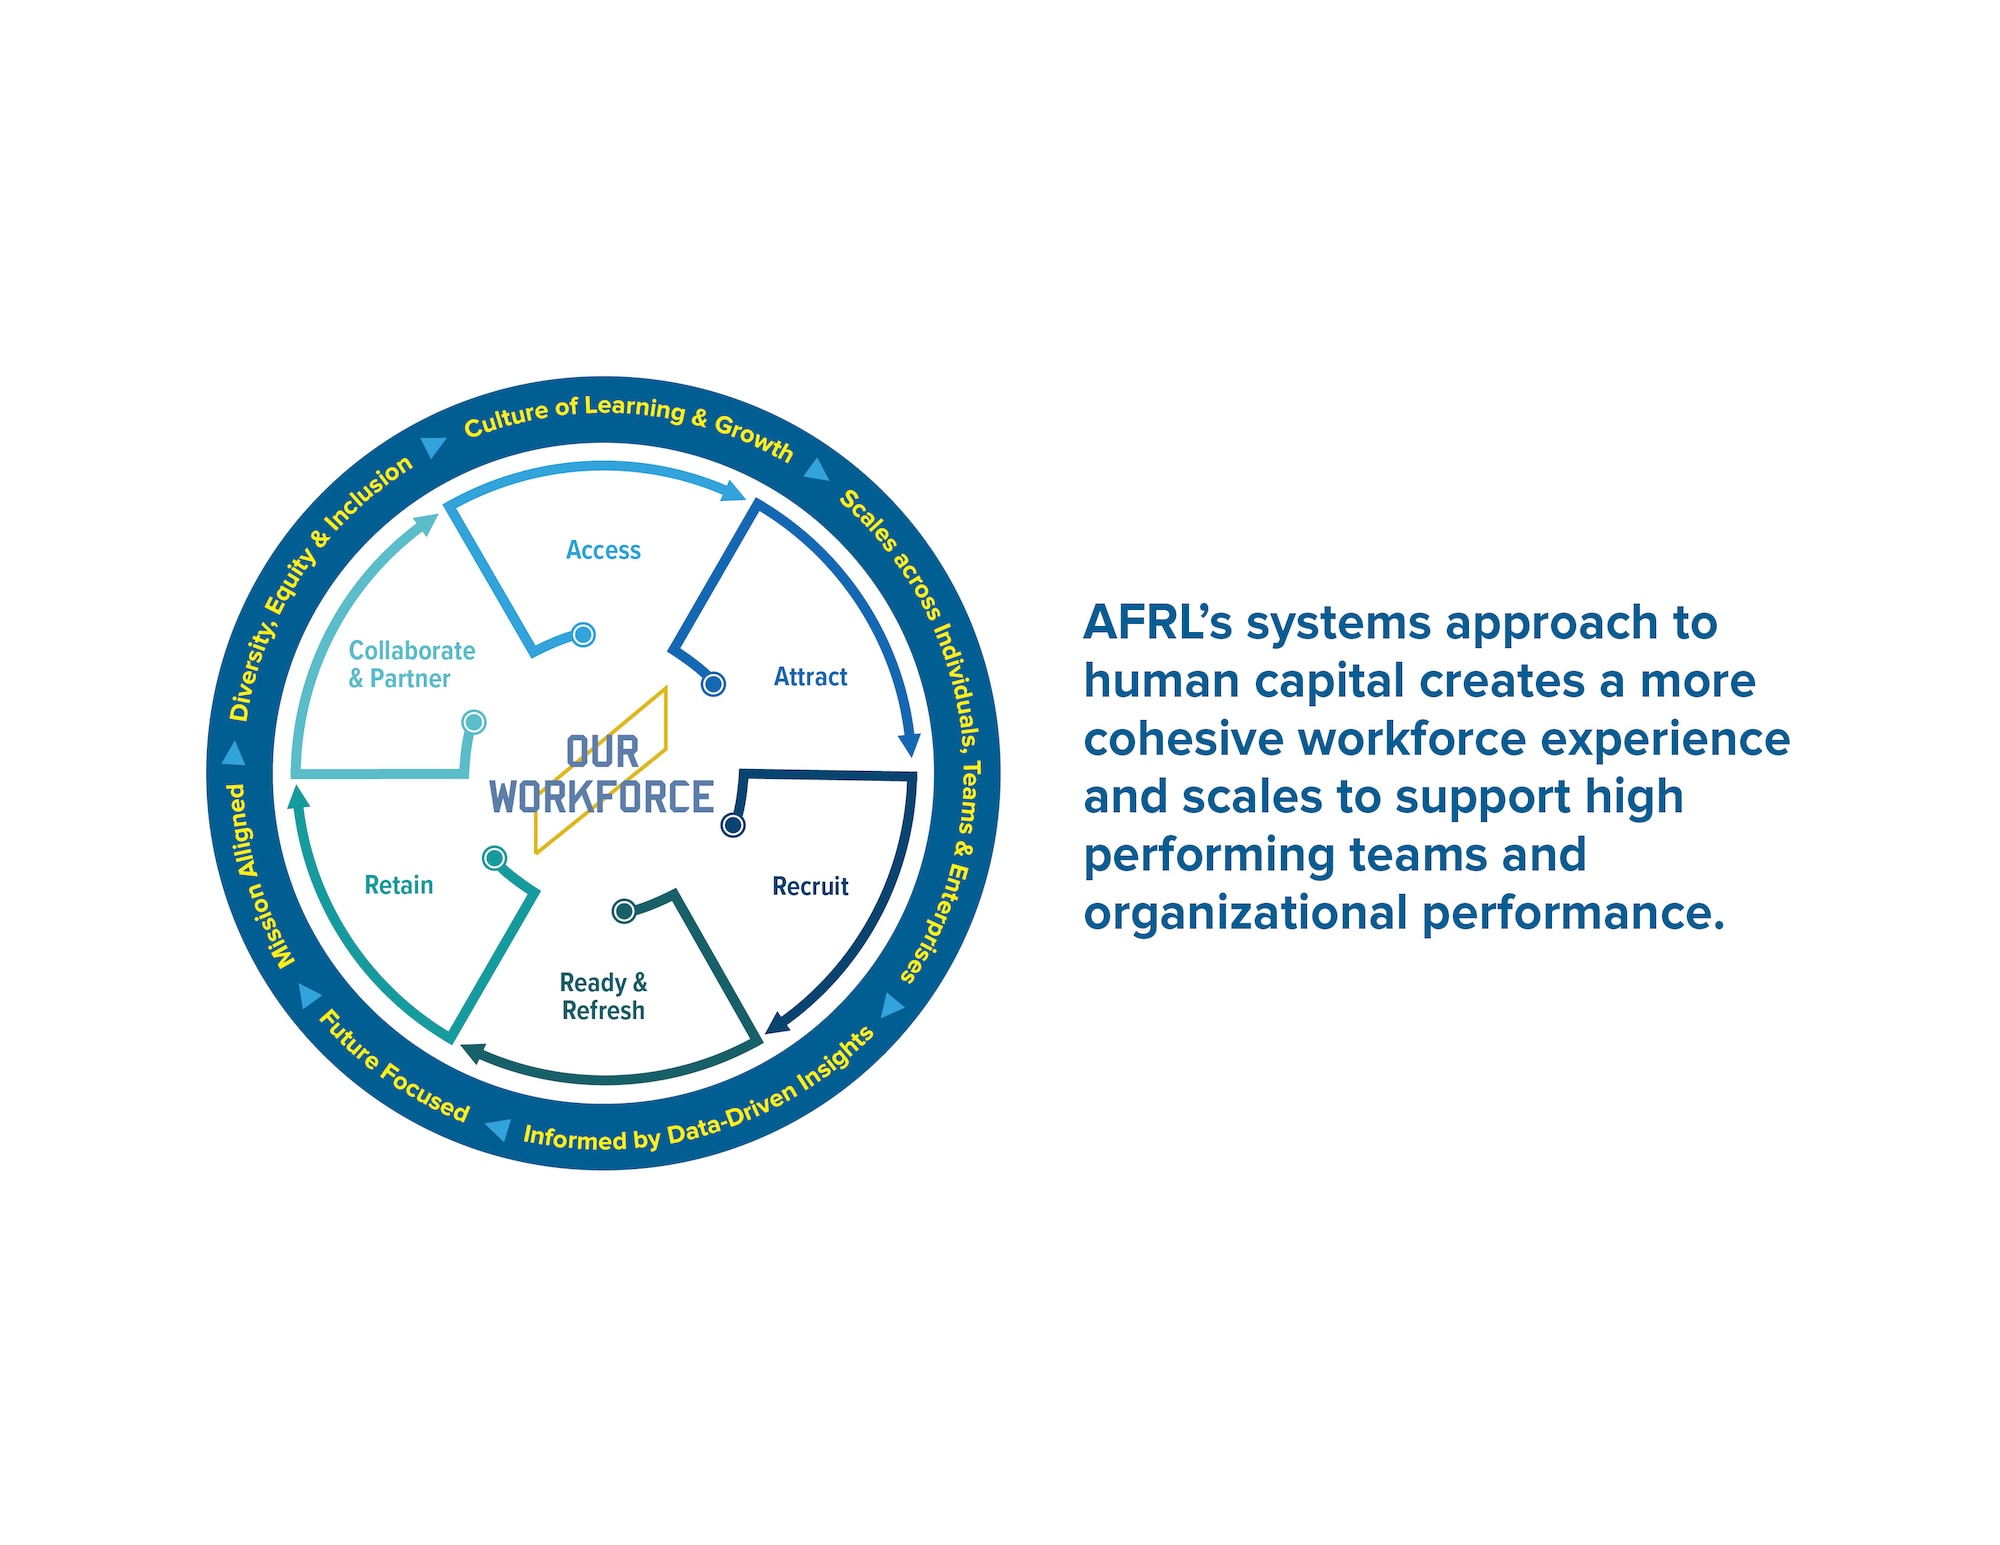 AFRL is employing a new human capital lifecycle systems model to integrate AF K-12 STEM Outreach; Enterprise Internship Pipeline; Human Resources and Personnel Management; Learning and Development; Diversity, Equity, and Inclusion (DEI); and Analytics and Strategic Foresight. This approach uses data to inform AFRL on the priorities that must be addressed to support our people now and into the future through descriptive and predictive data analytics. It creates a more cohesive workforce experience and scales to support high performing teams and organizational performance. This approach embraces and institutionalizes innovation in human capital practices and policies. By assessing trends and influences on the talent market and the future of work, AFRL can prepare for the future today by continuously scanning for, applying, and pioneering leading human capital practices for the maximum benefit of all our people. (Courtesy illustration)